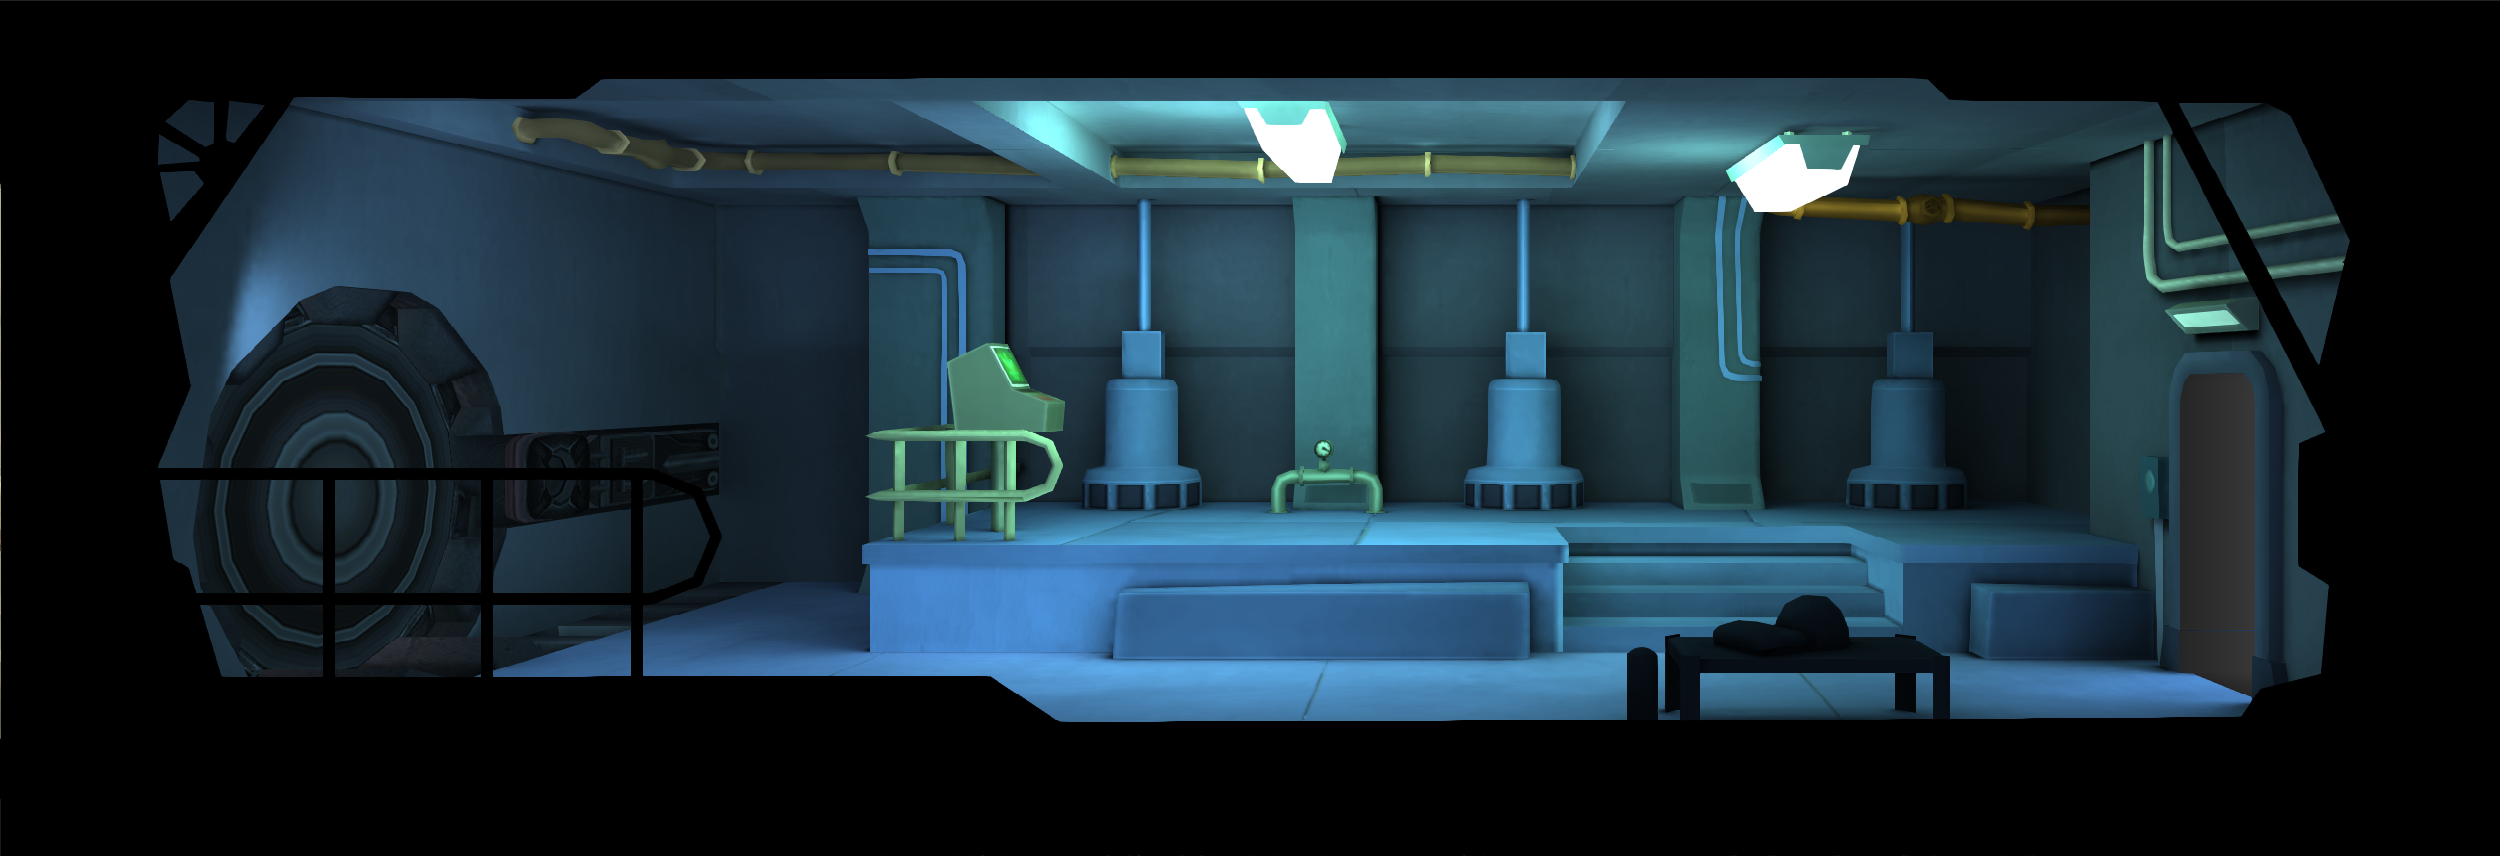 fallout shelter game wiki